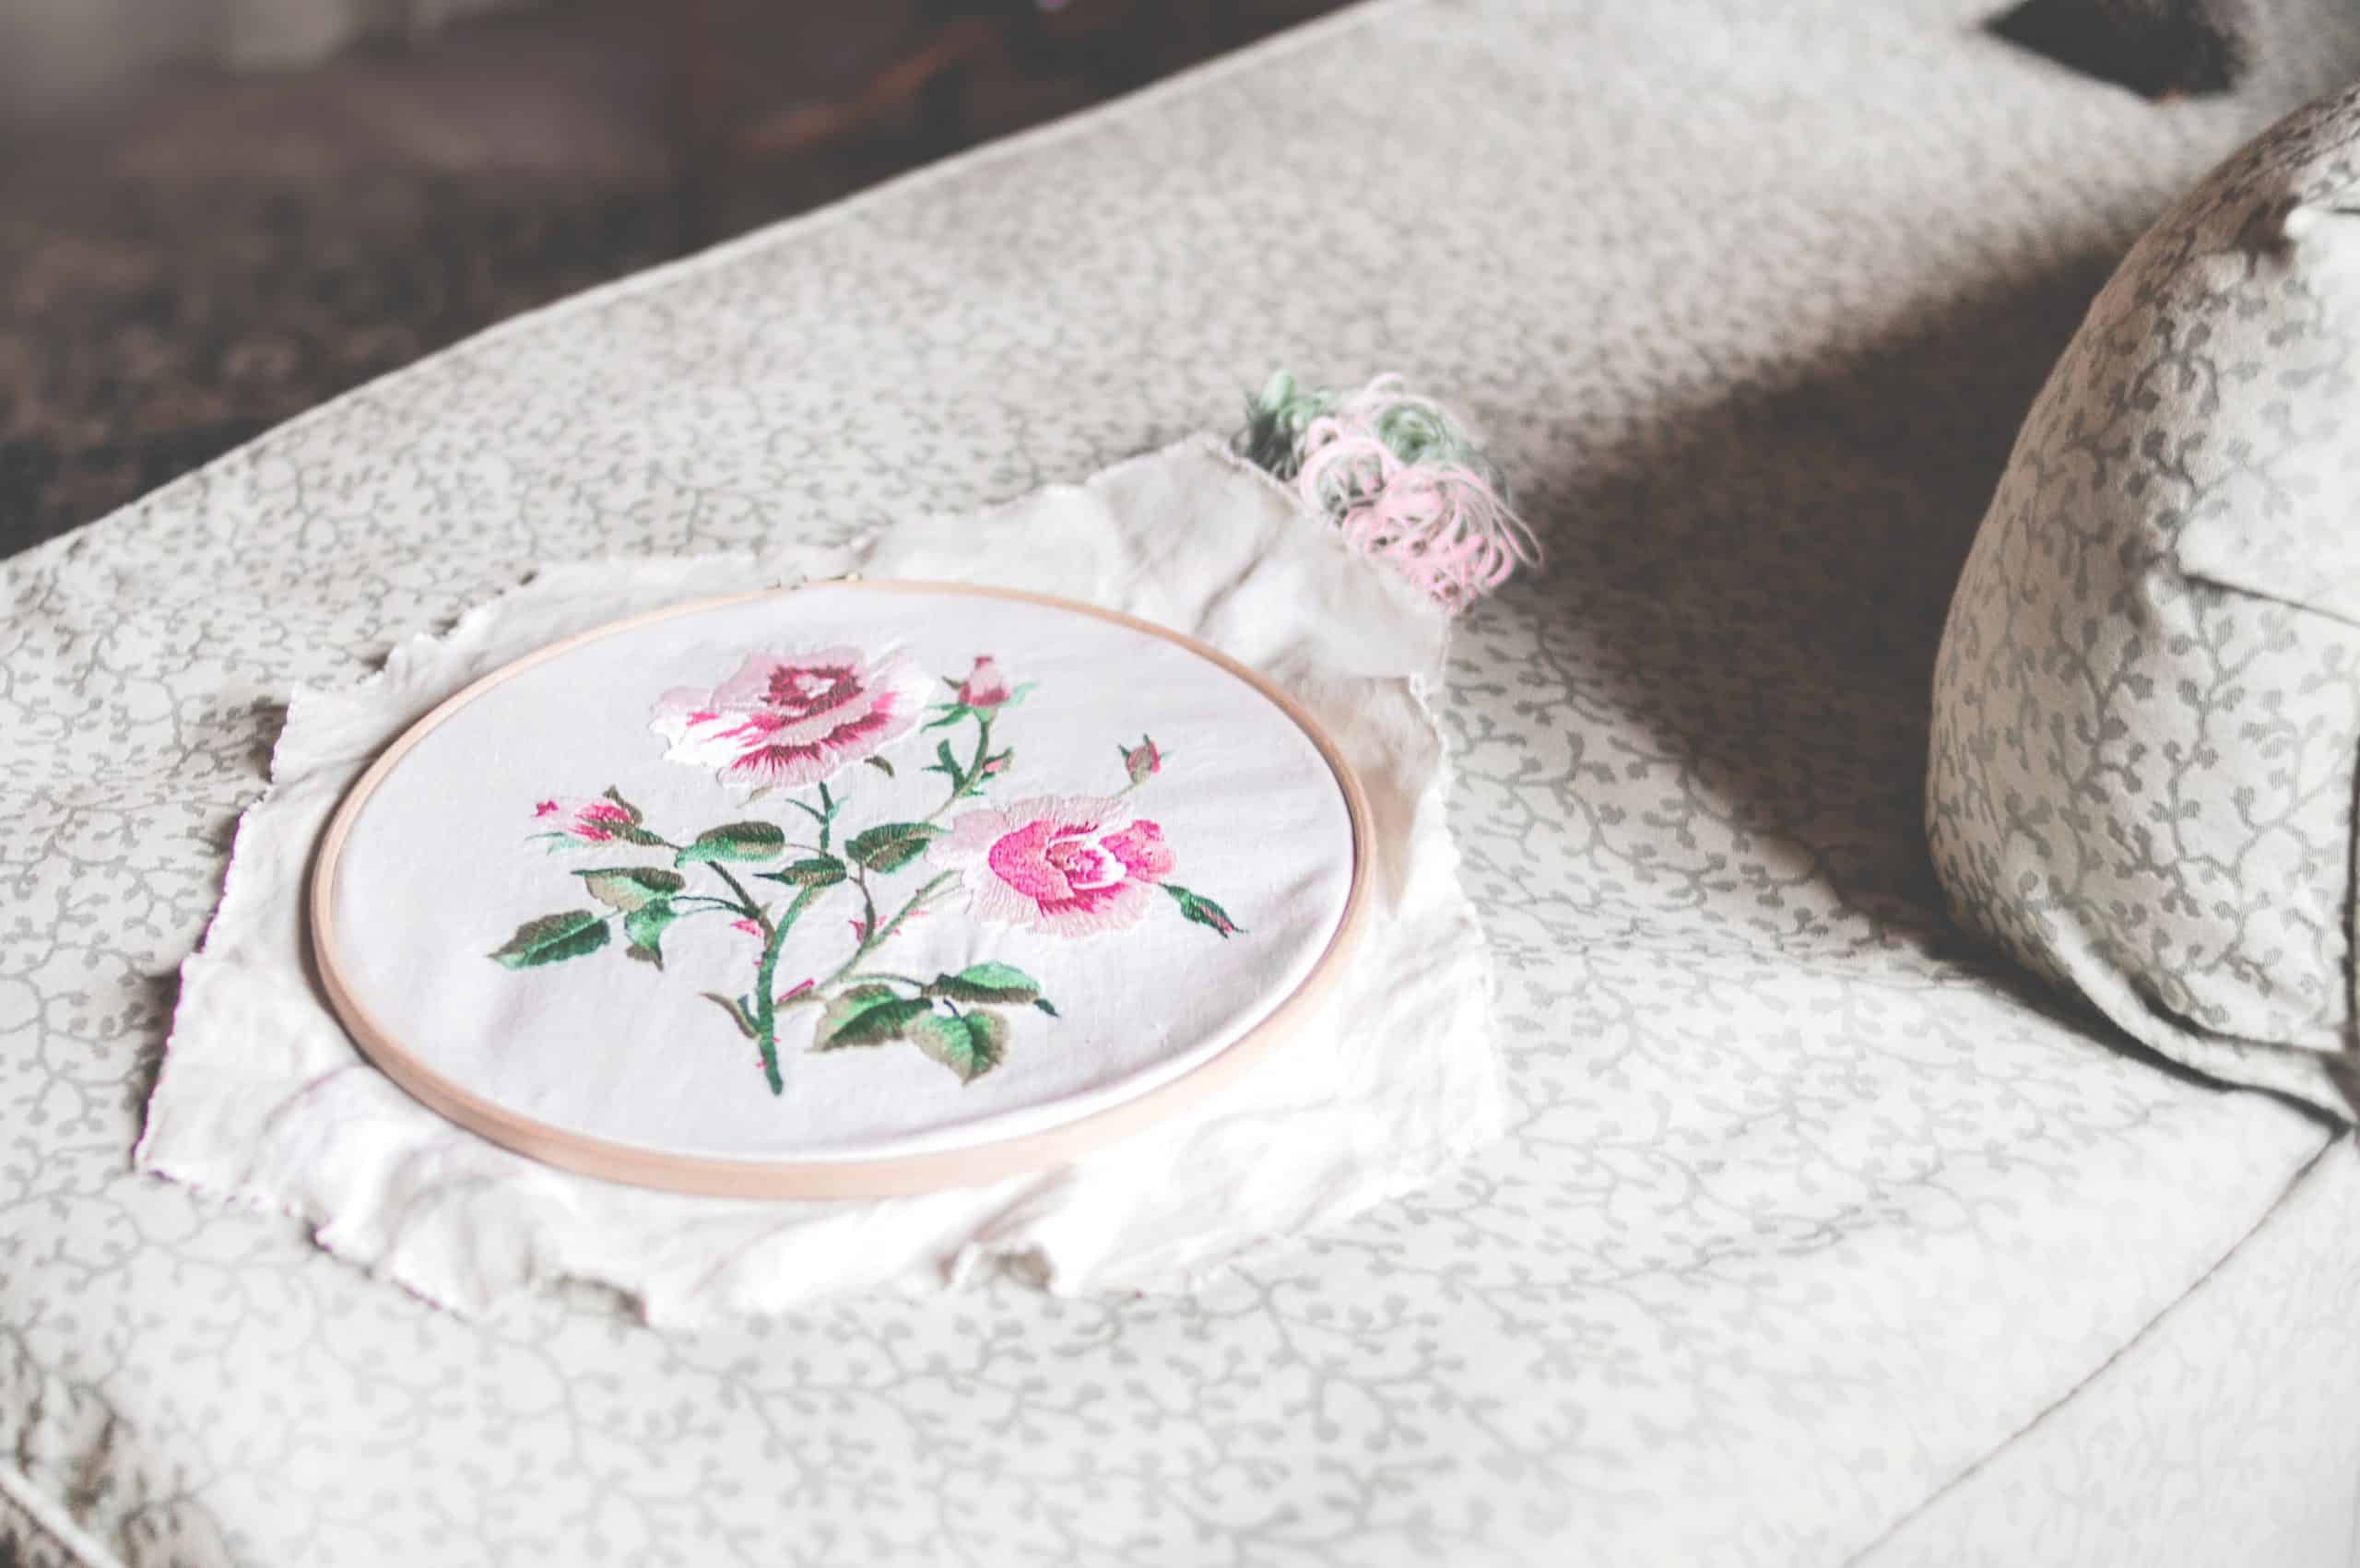 How to learn to embroider?